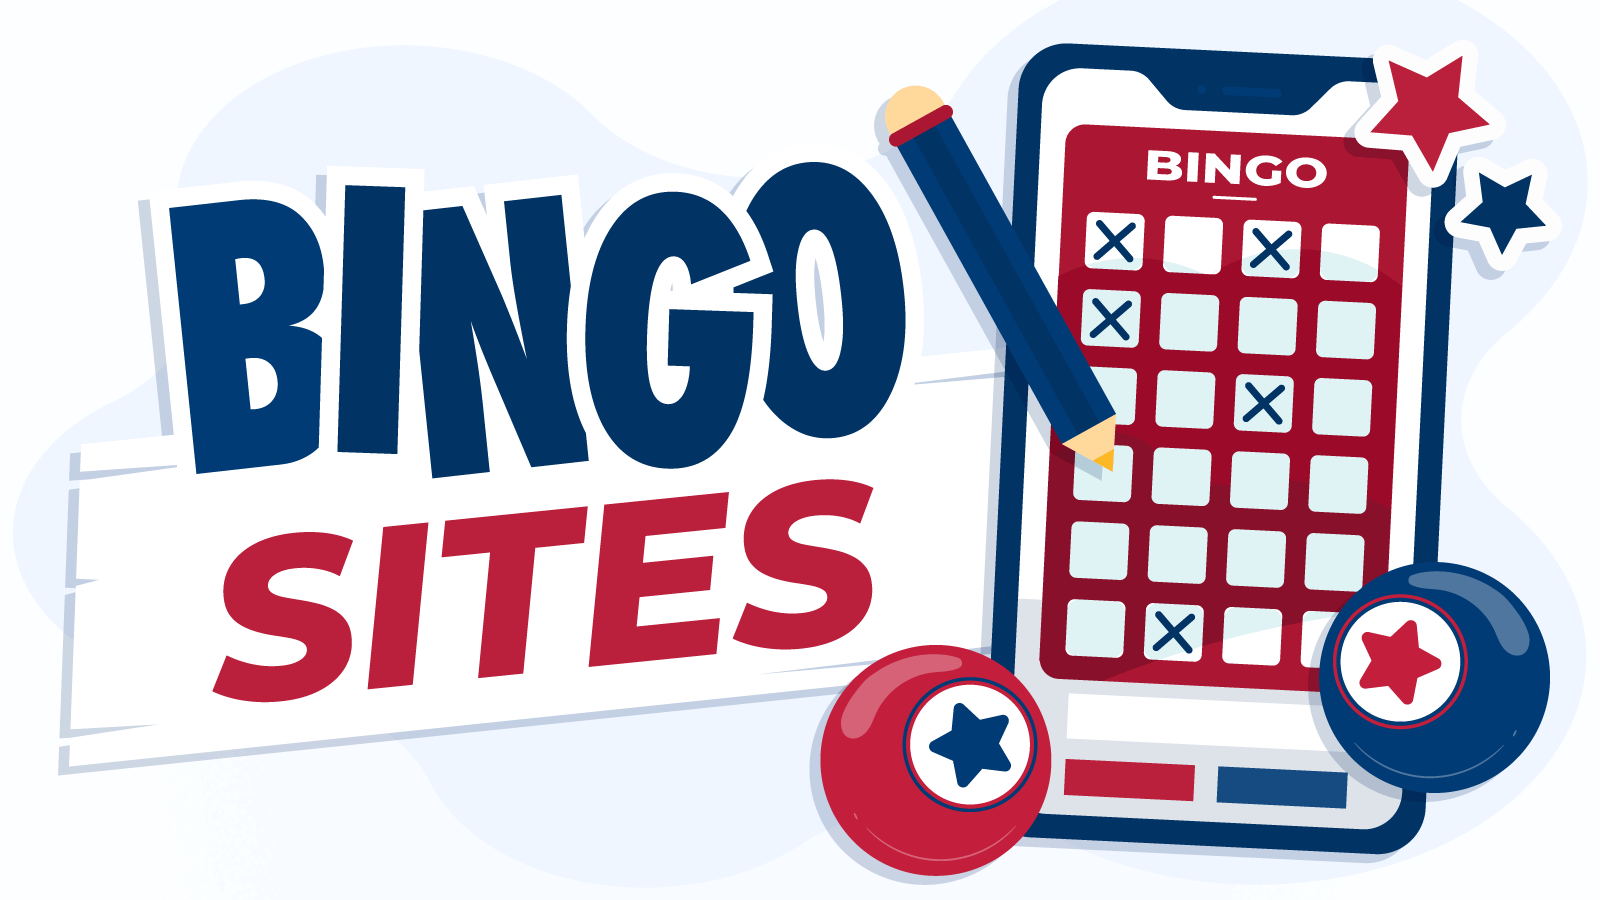 How To Find The Best Bingo Site For You